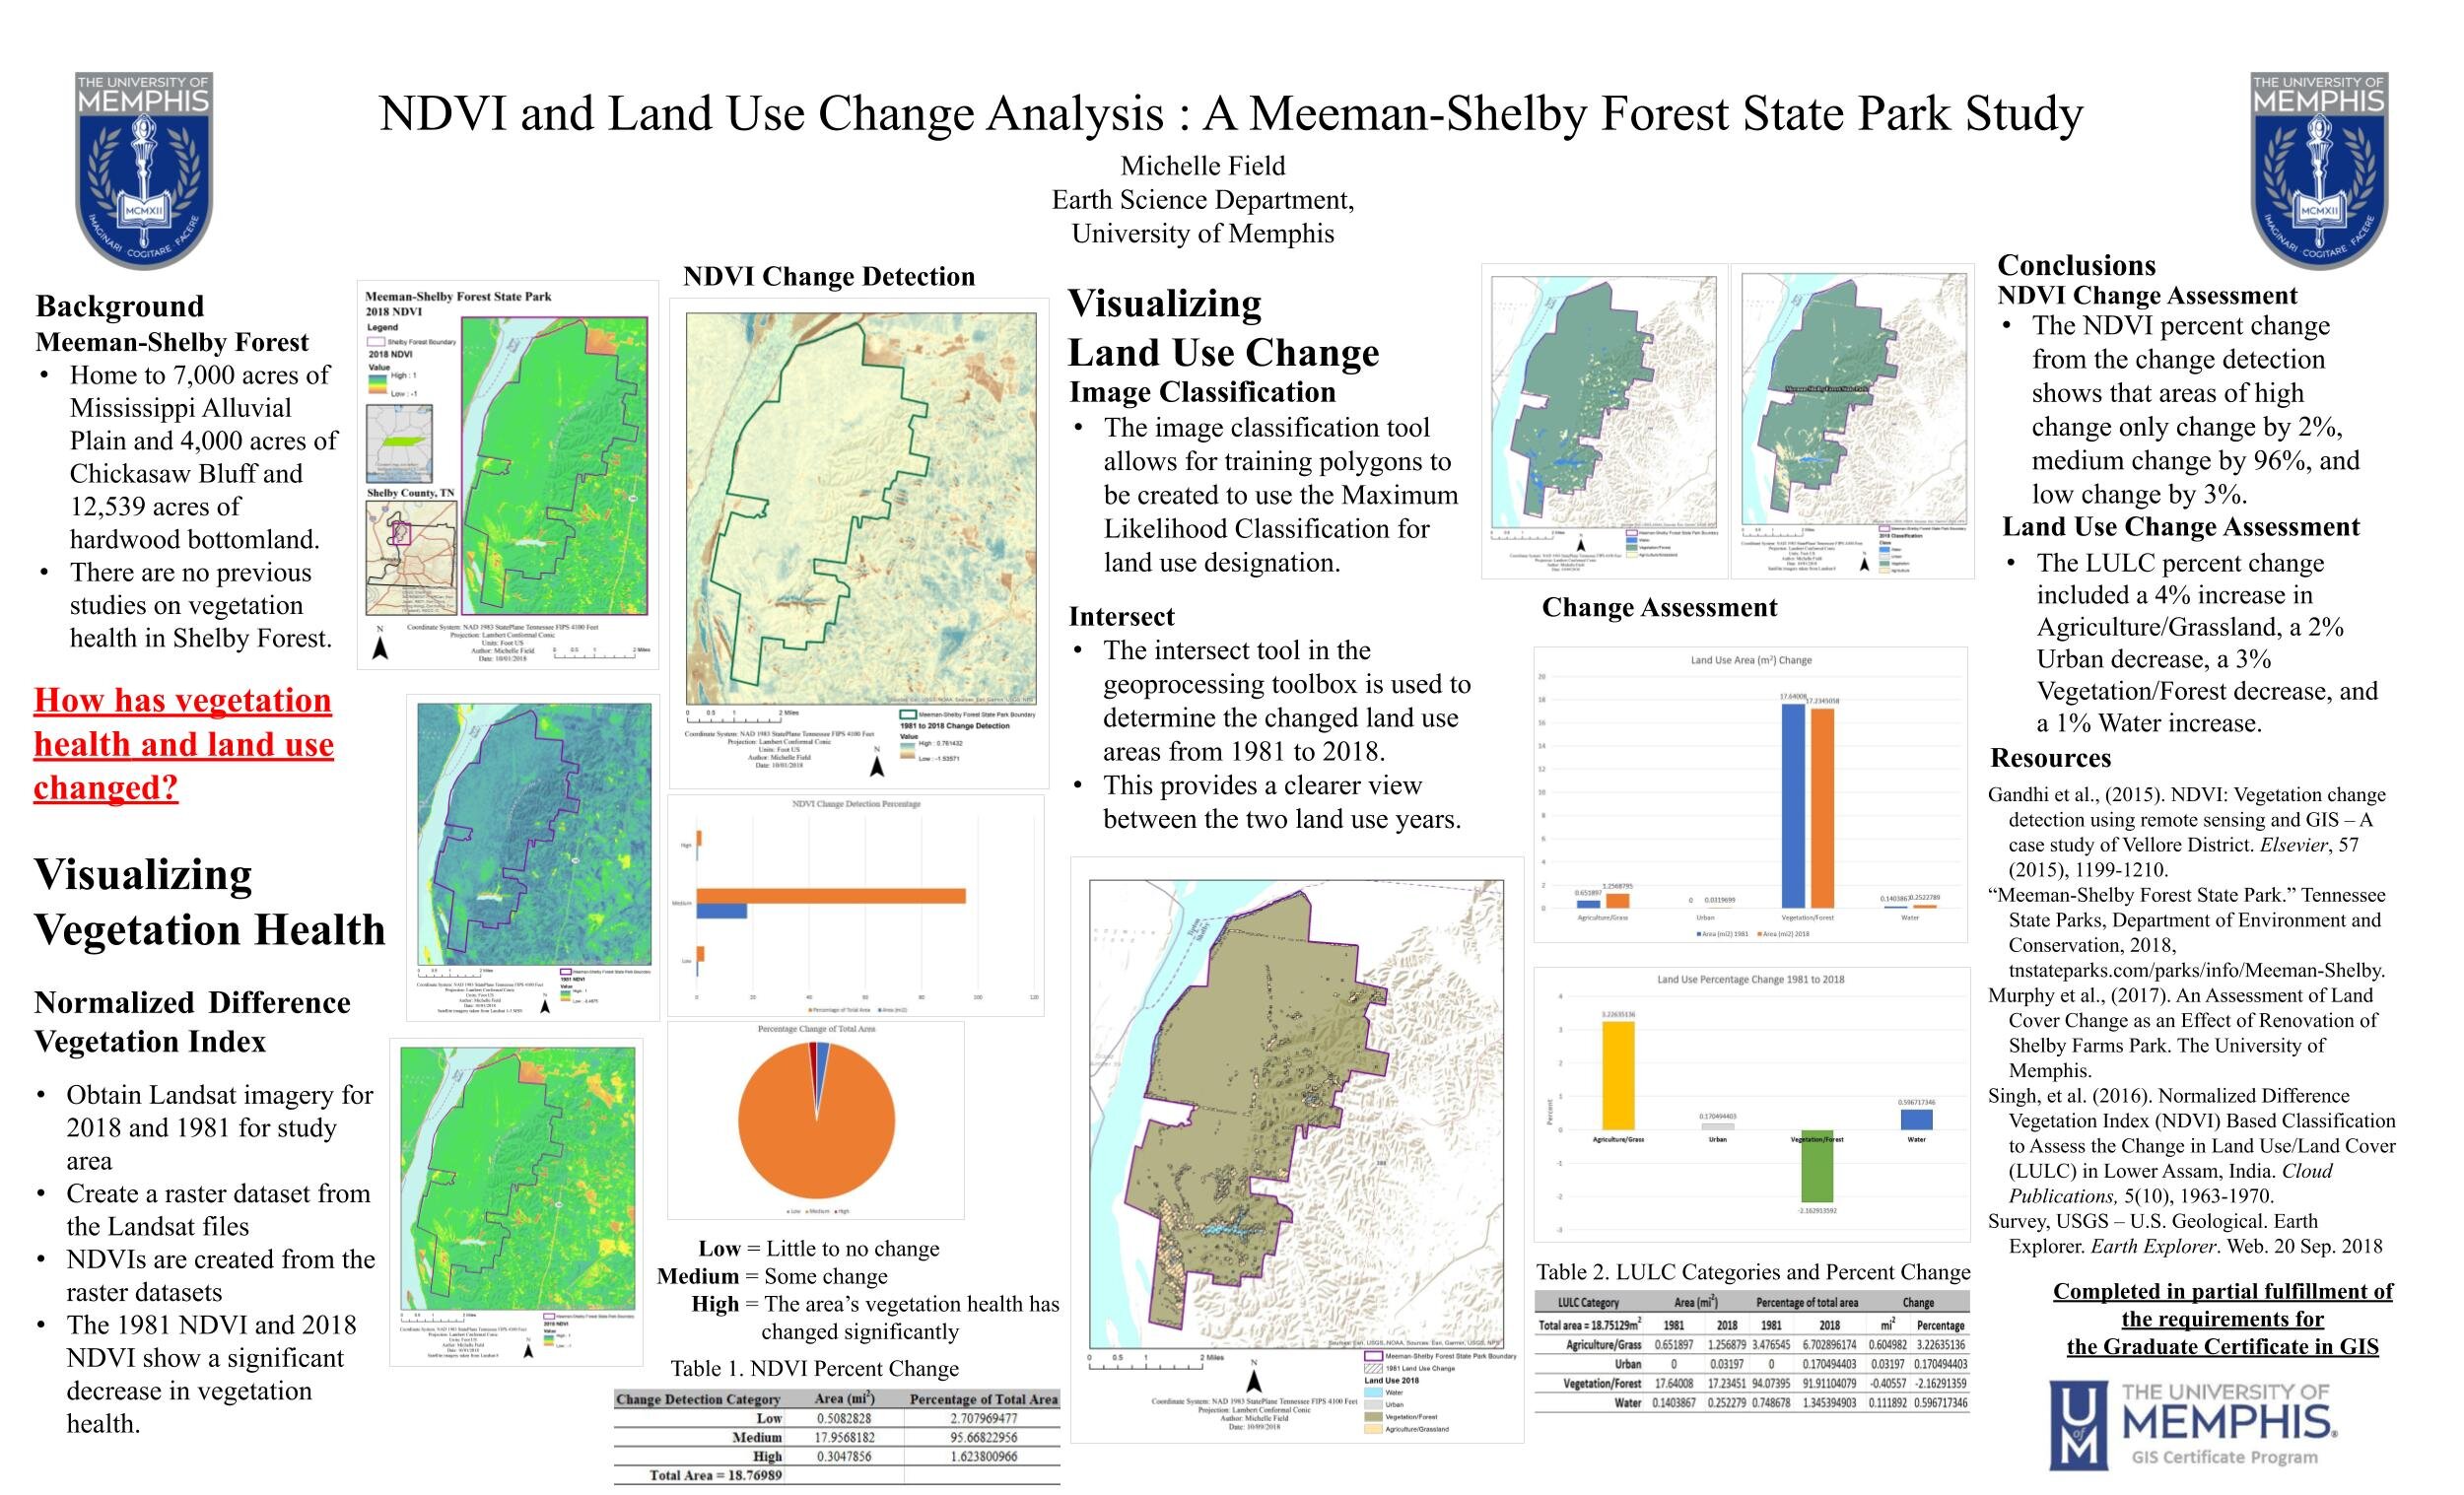 NDVI and Land Use Change Analysis: A Meeman-Shelby Forest State Park Study